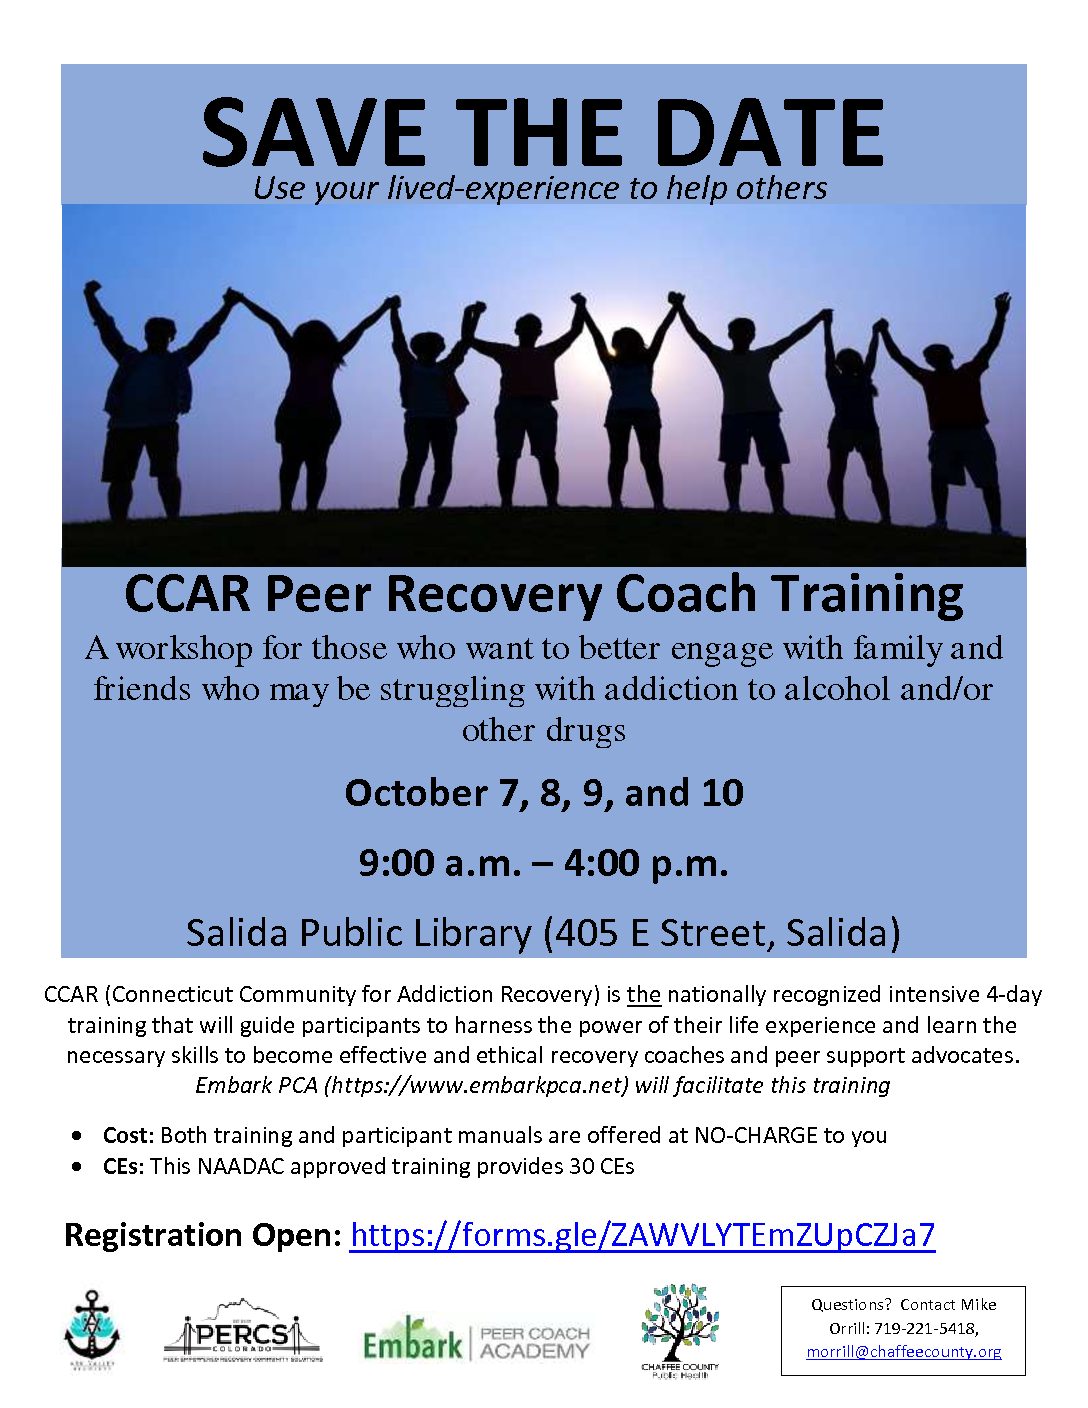 CCAR Peer Recovery Coach Training Salida Chamber of Commerce